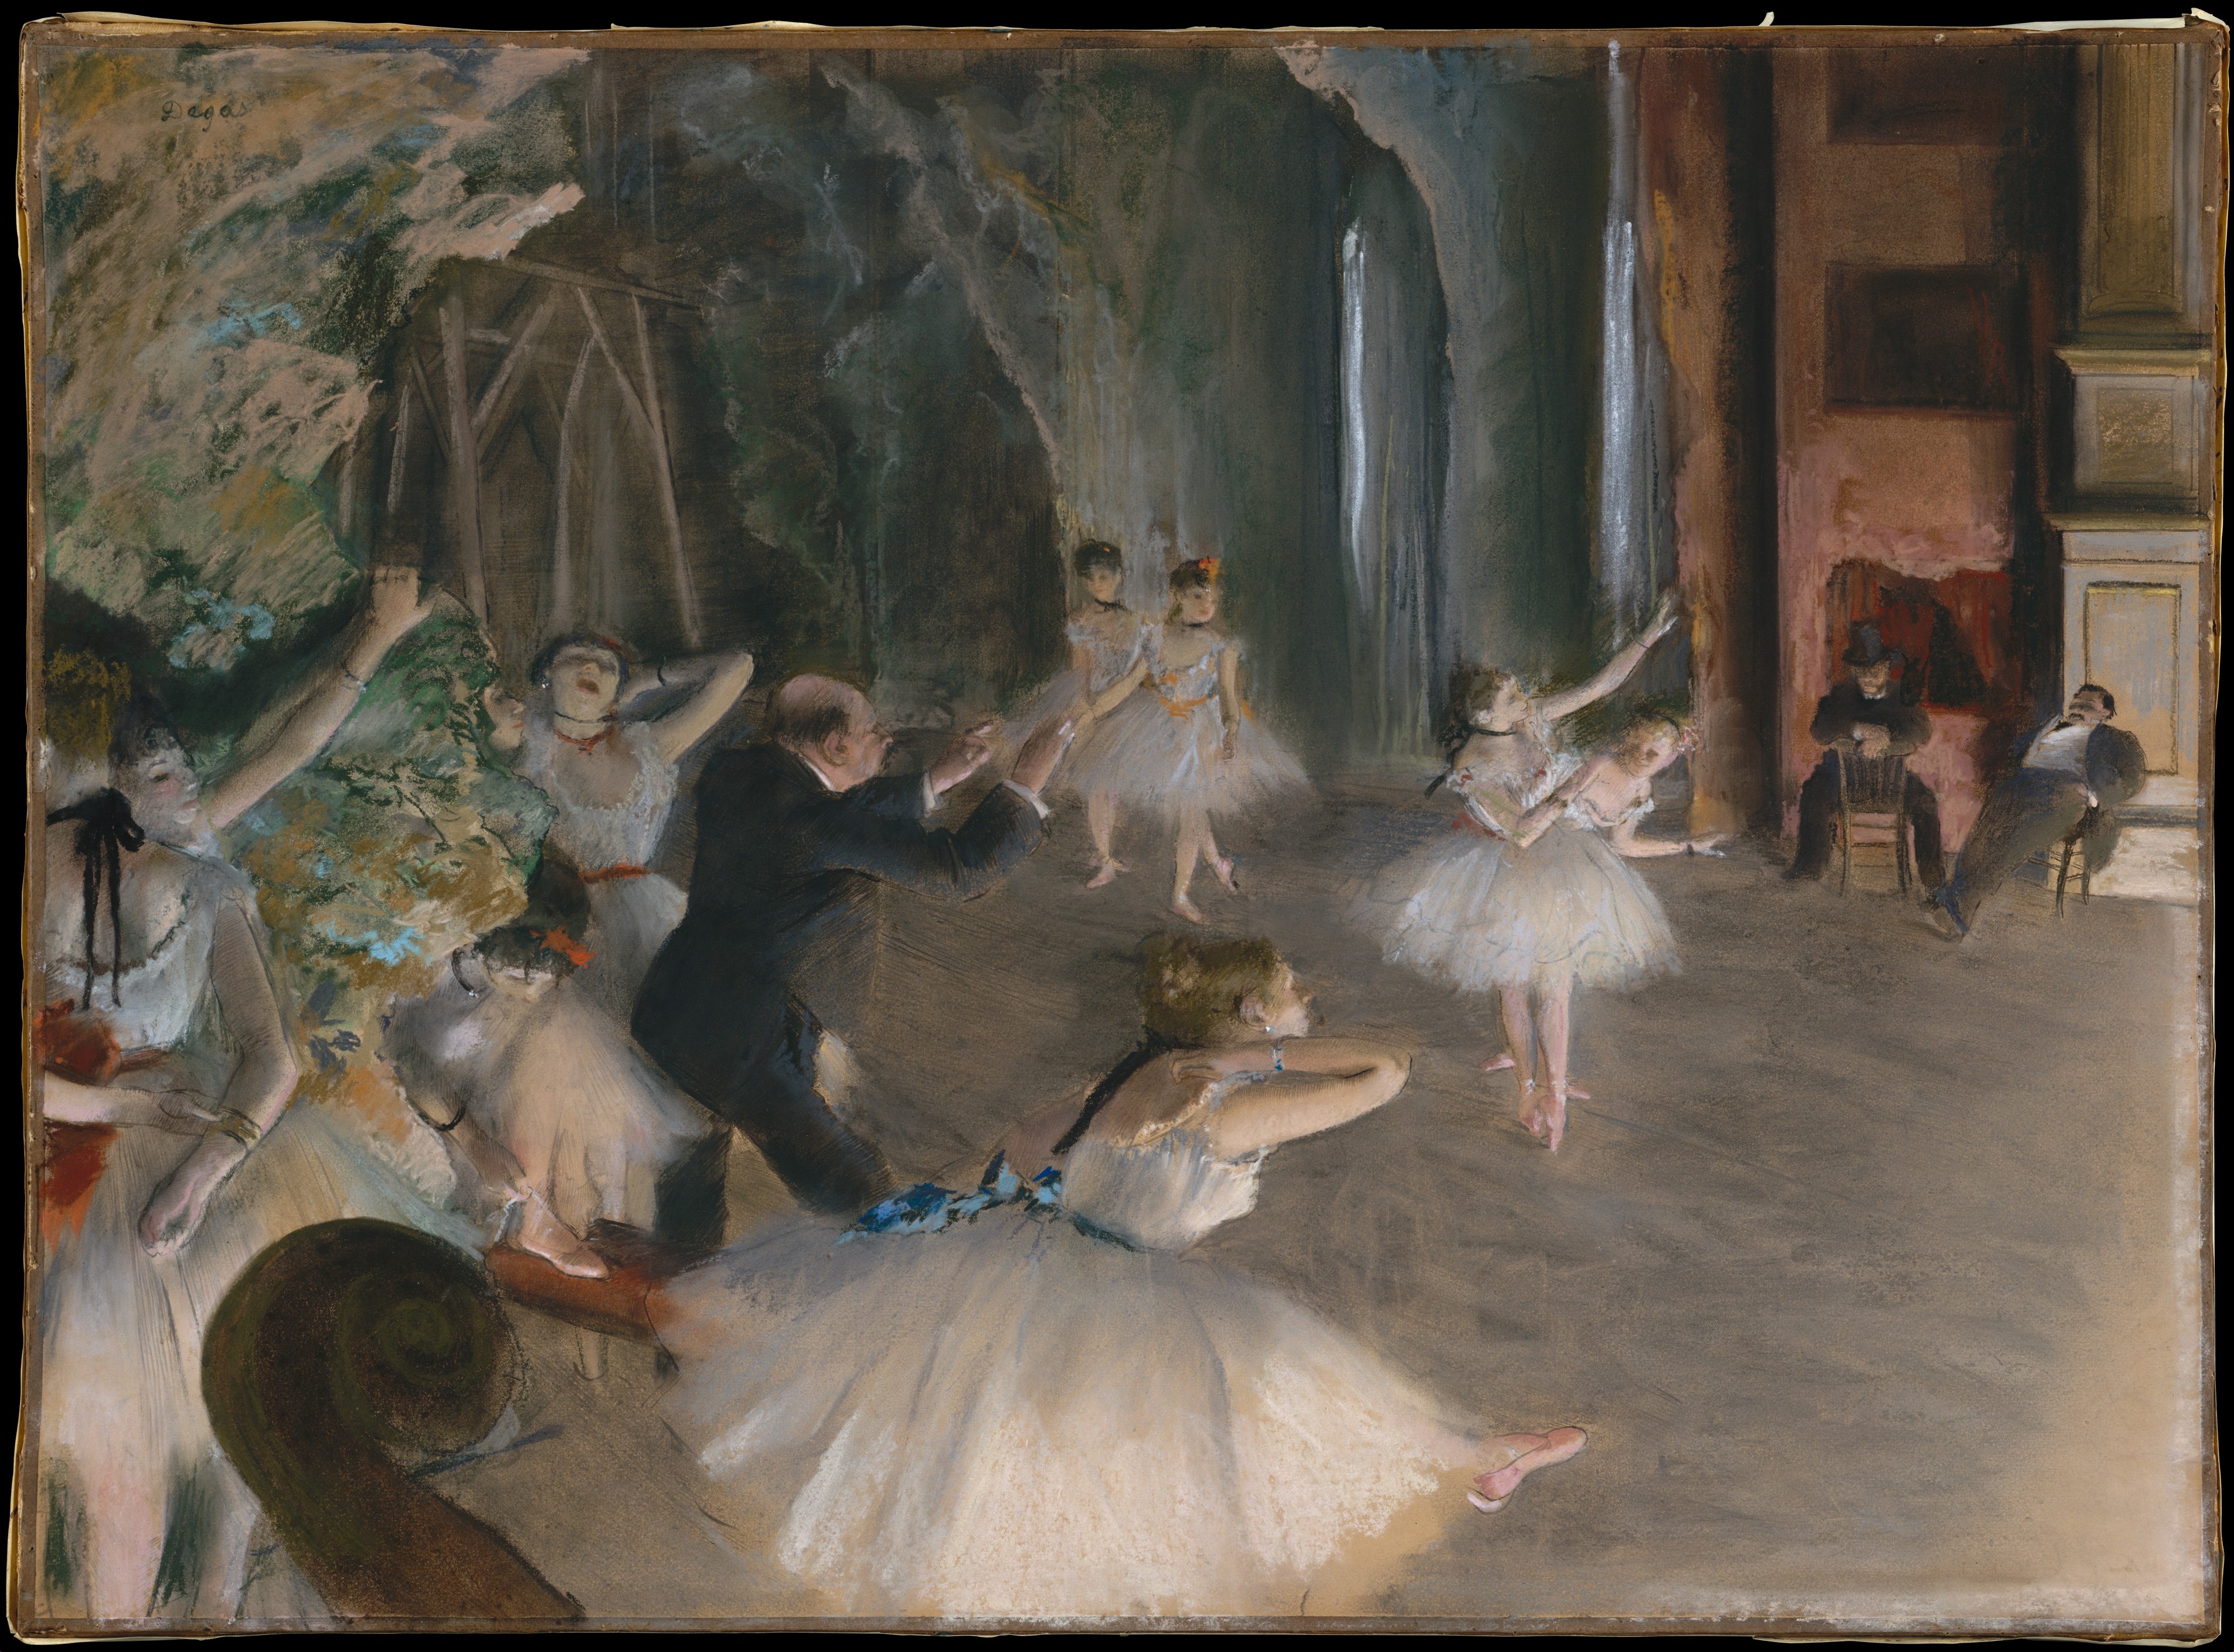 Edgar Degas, The Rehearsal of the Ballet Onstage, 1874